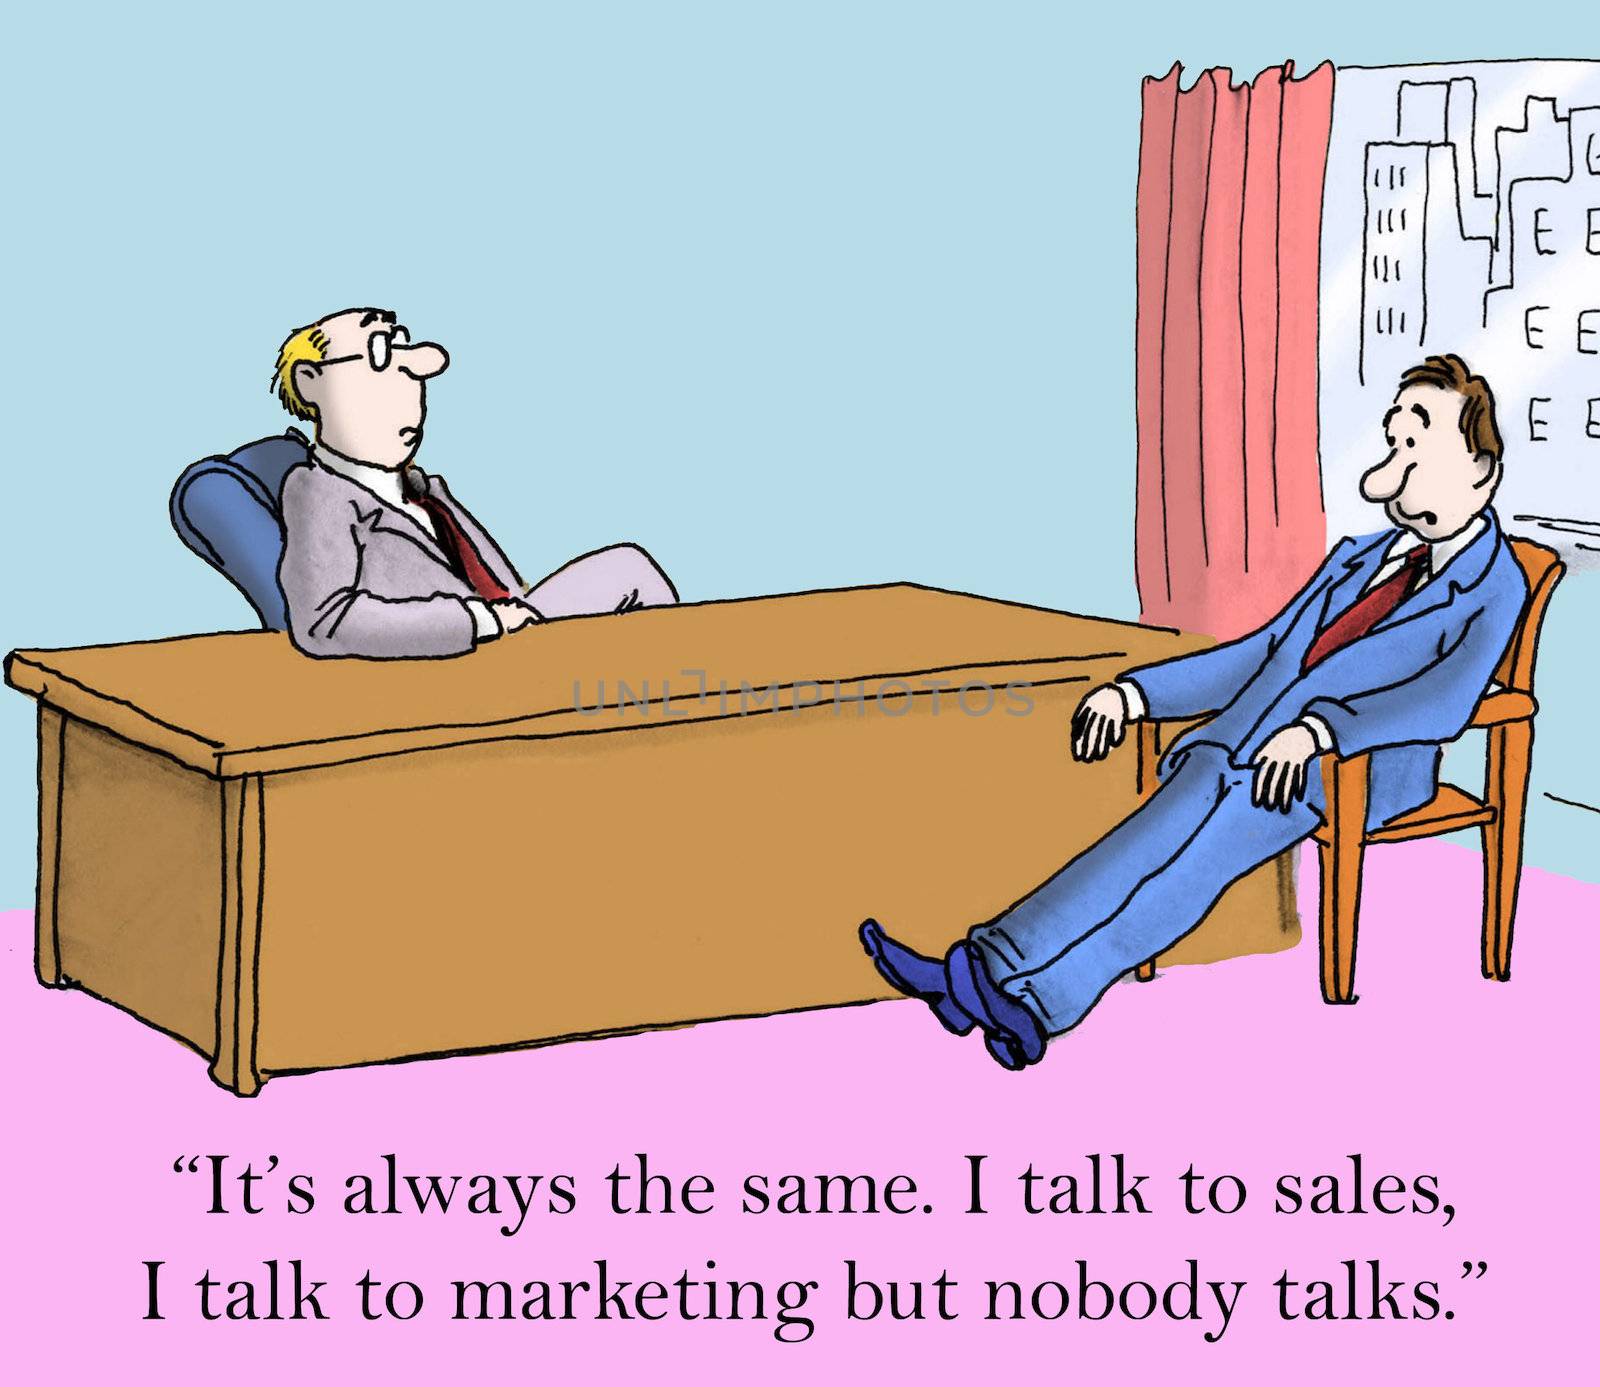 "It's always the same. I talk to sales and I talk to marketing but nobody talks.